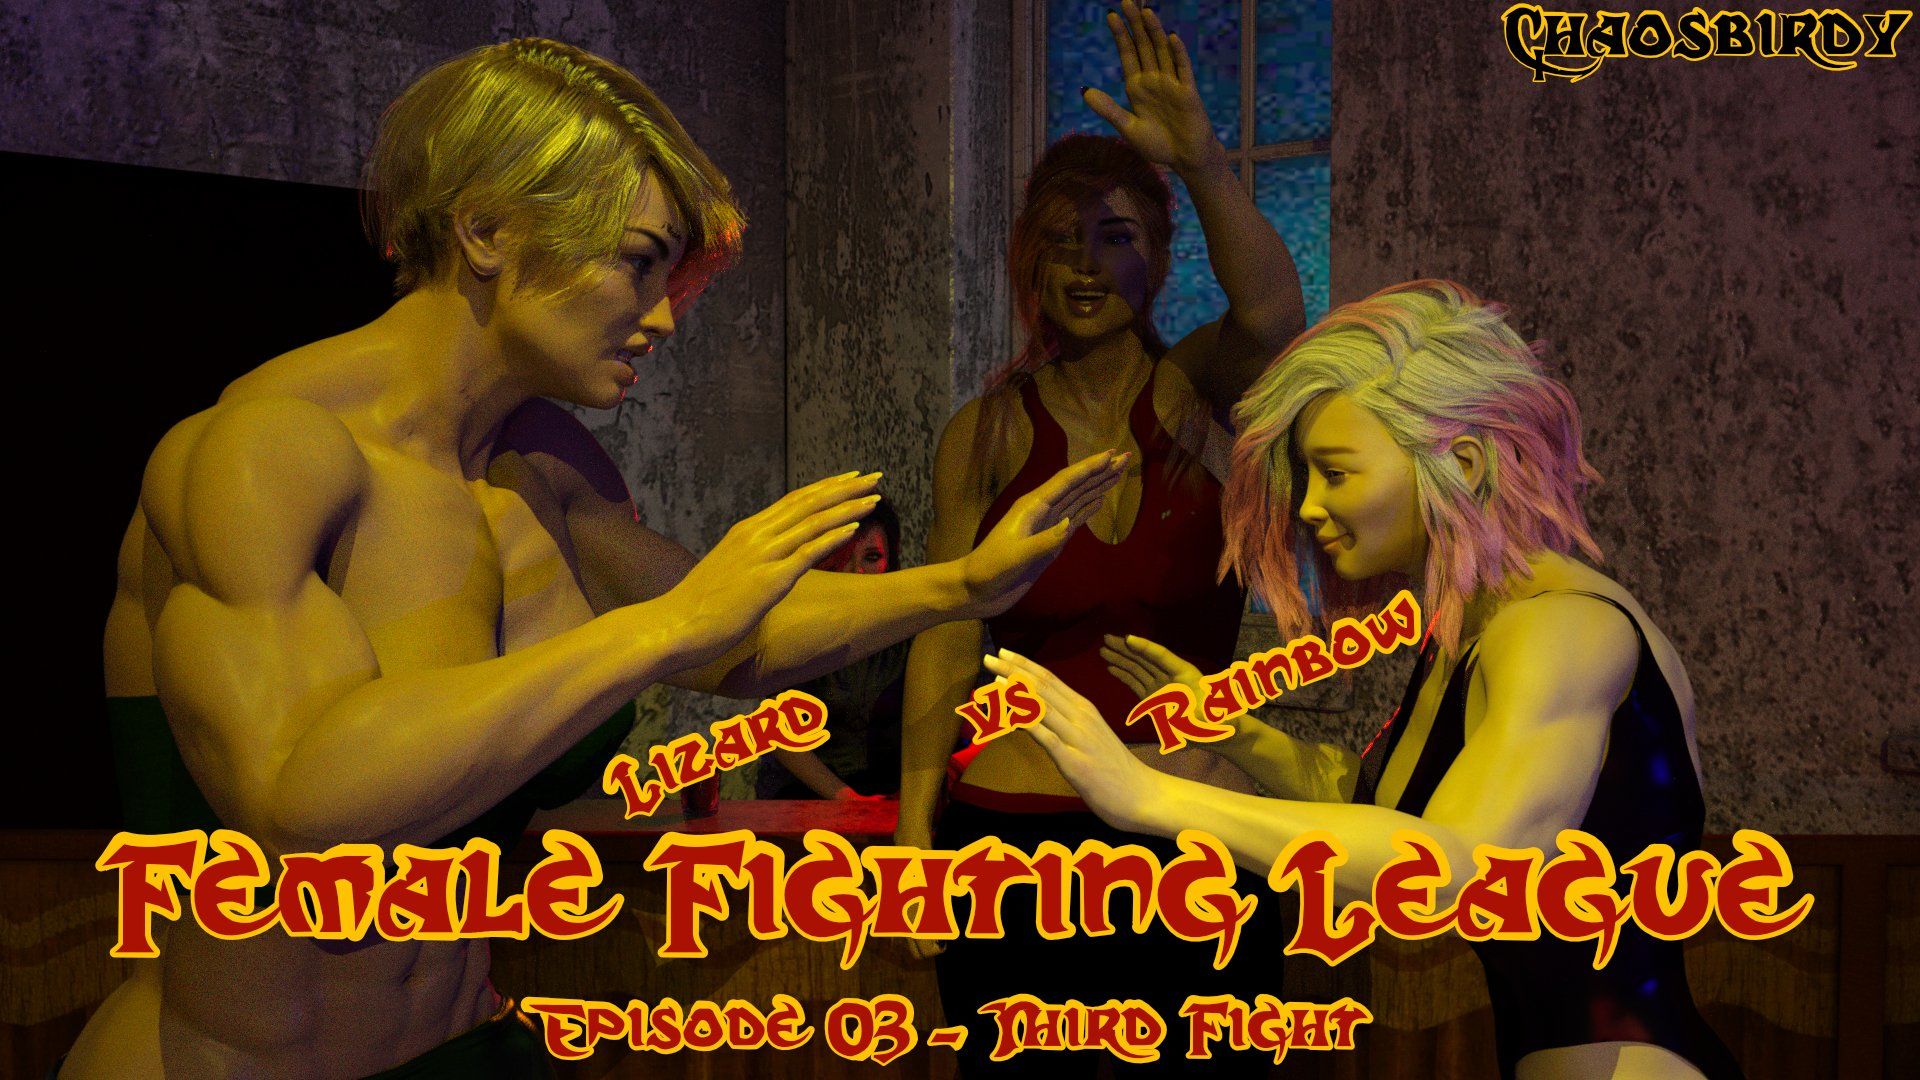 Female Fighting League Episode 3 - Chaosbirdy page 1